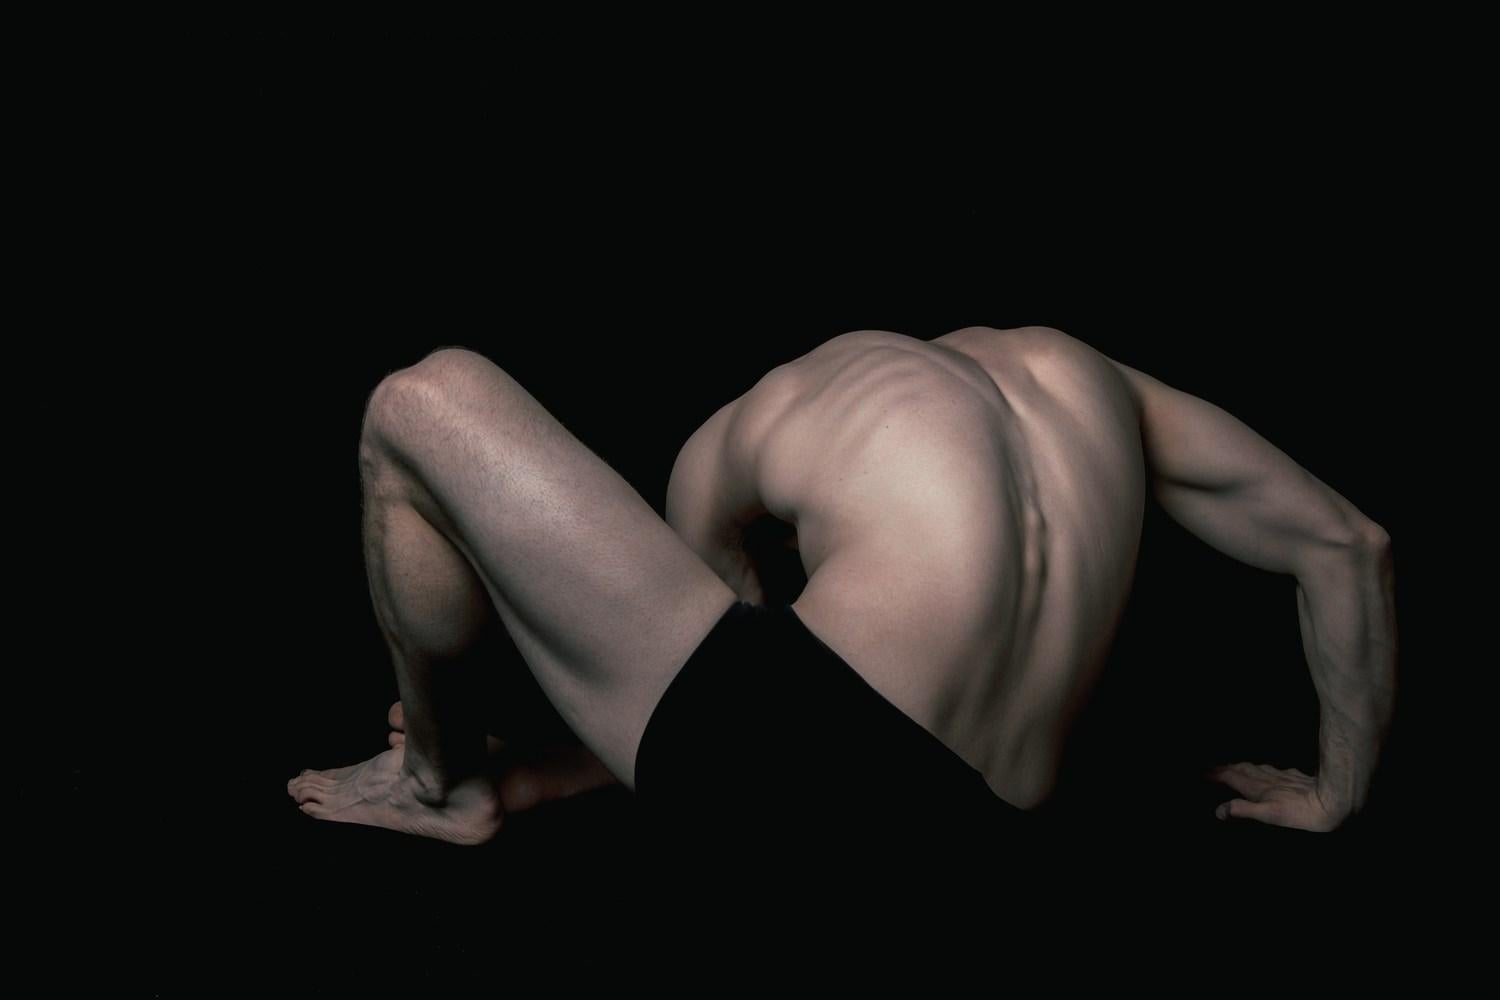 David Pugh Portrait Photograph - “Untitled” (from Body Series)